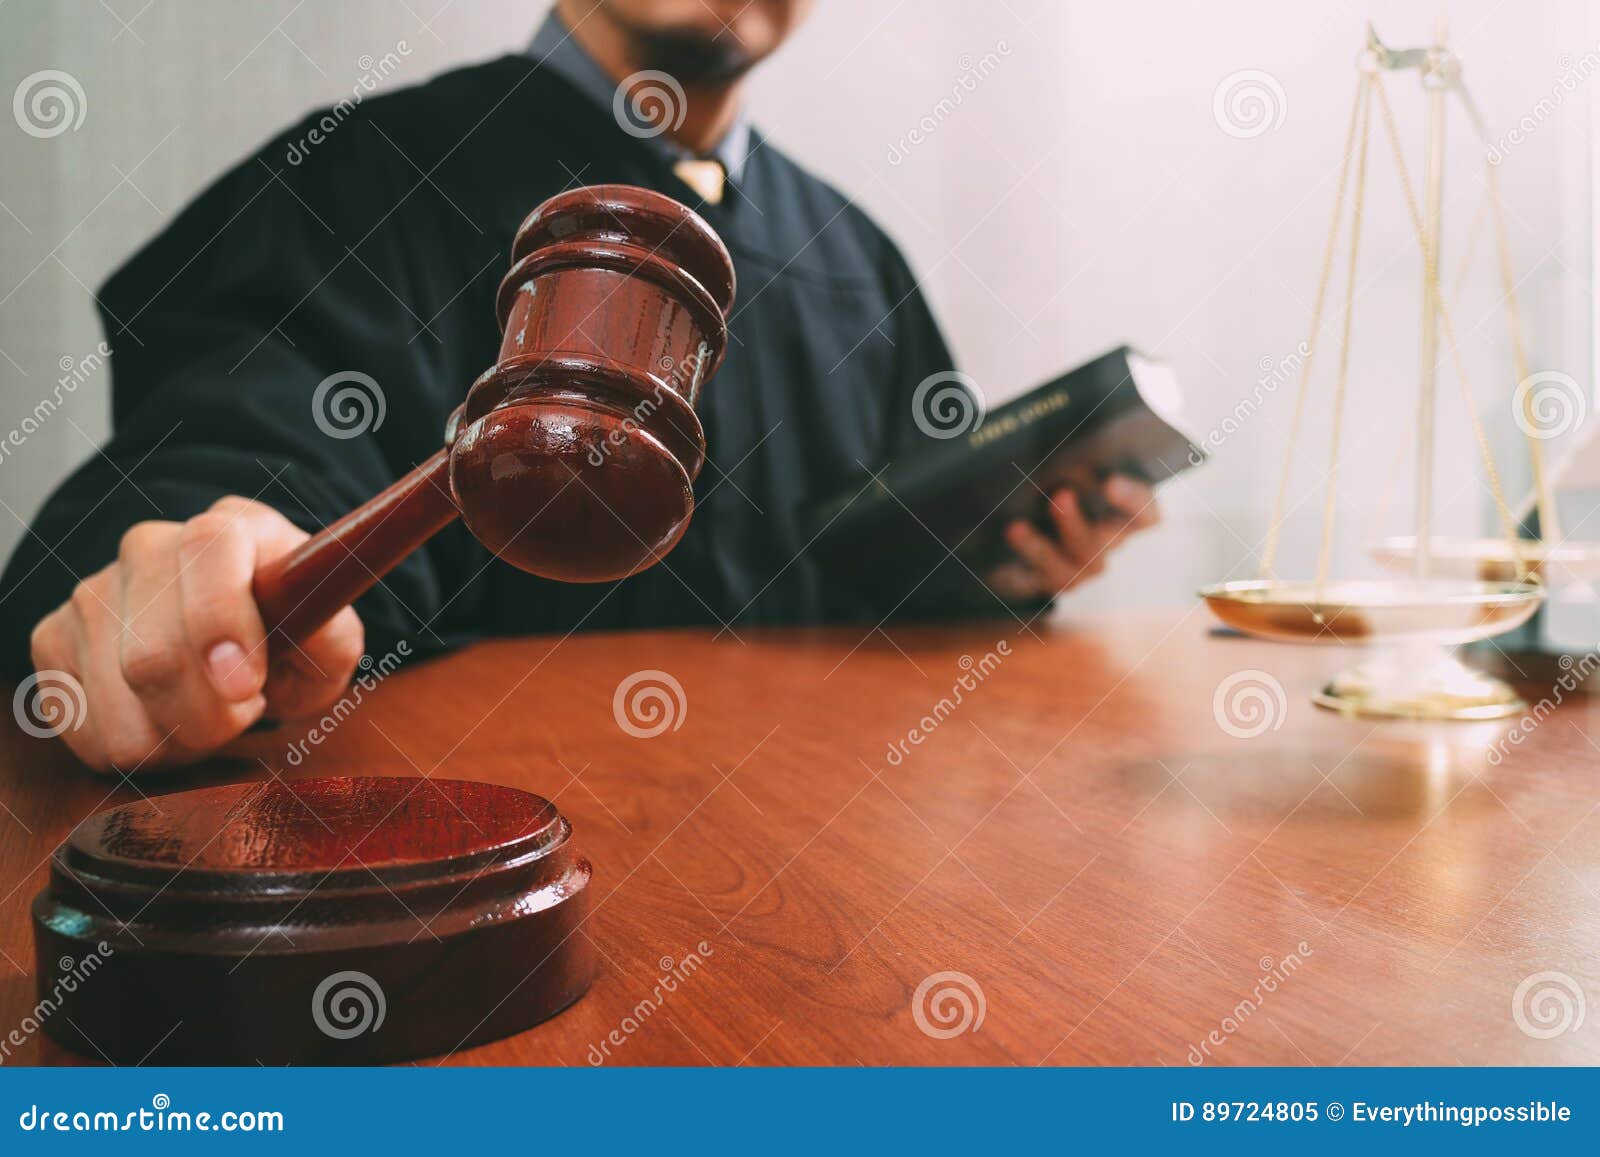 justice and law concept.male judge in a courtroom with the gavel